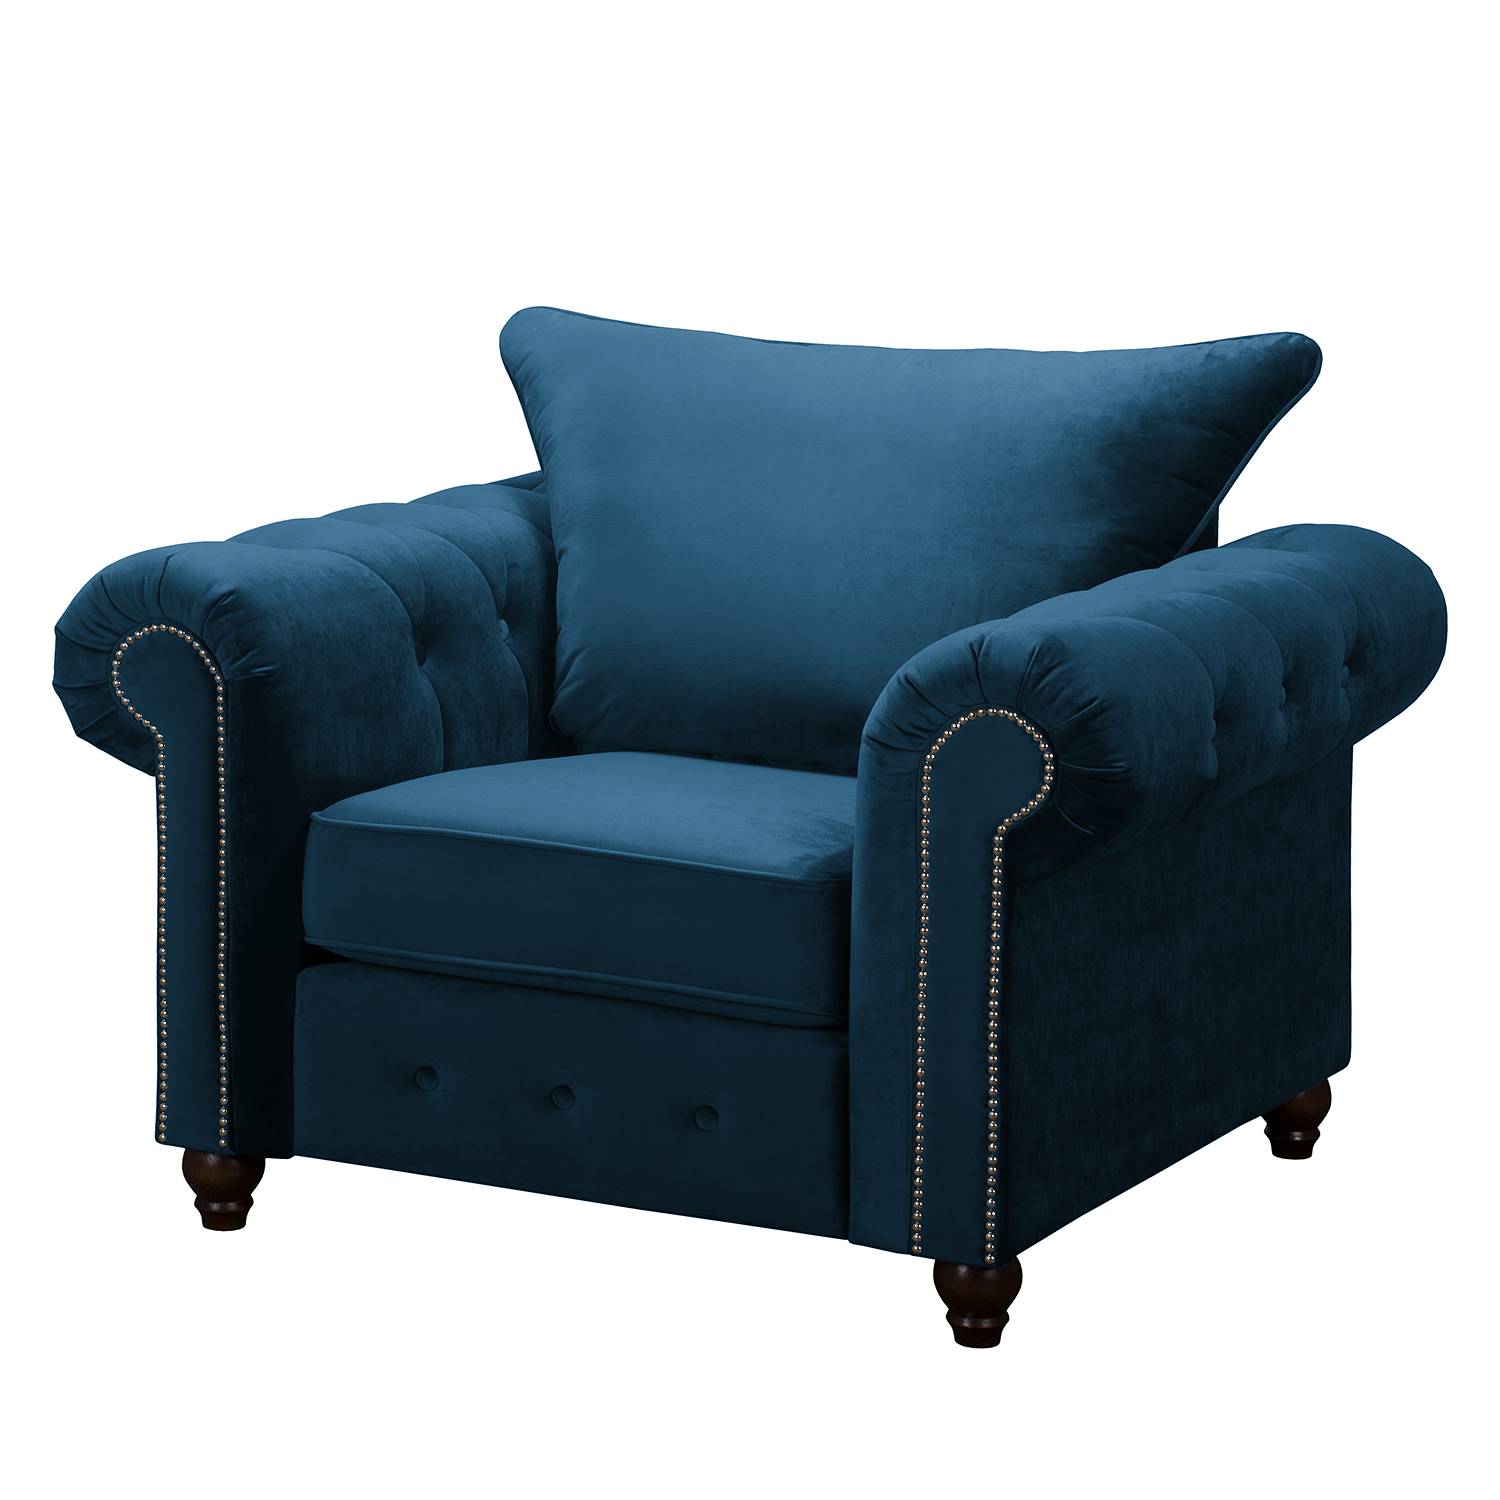 Image of Fauteuil Solita 000000001000135652